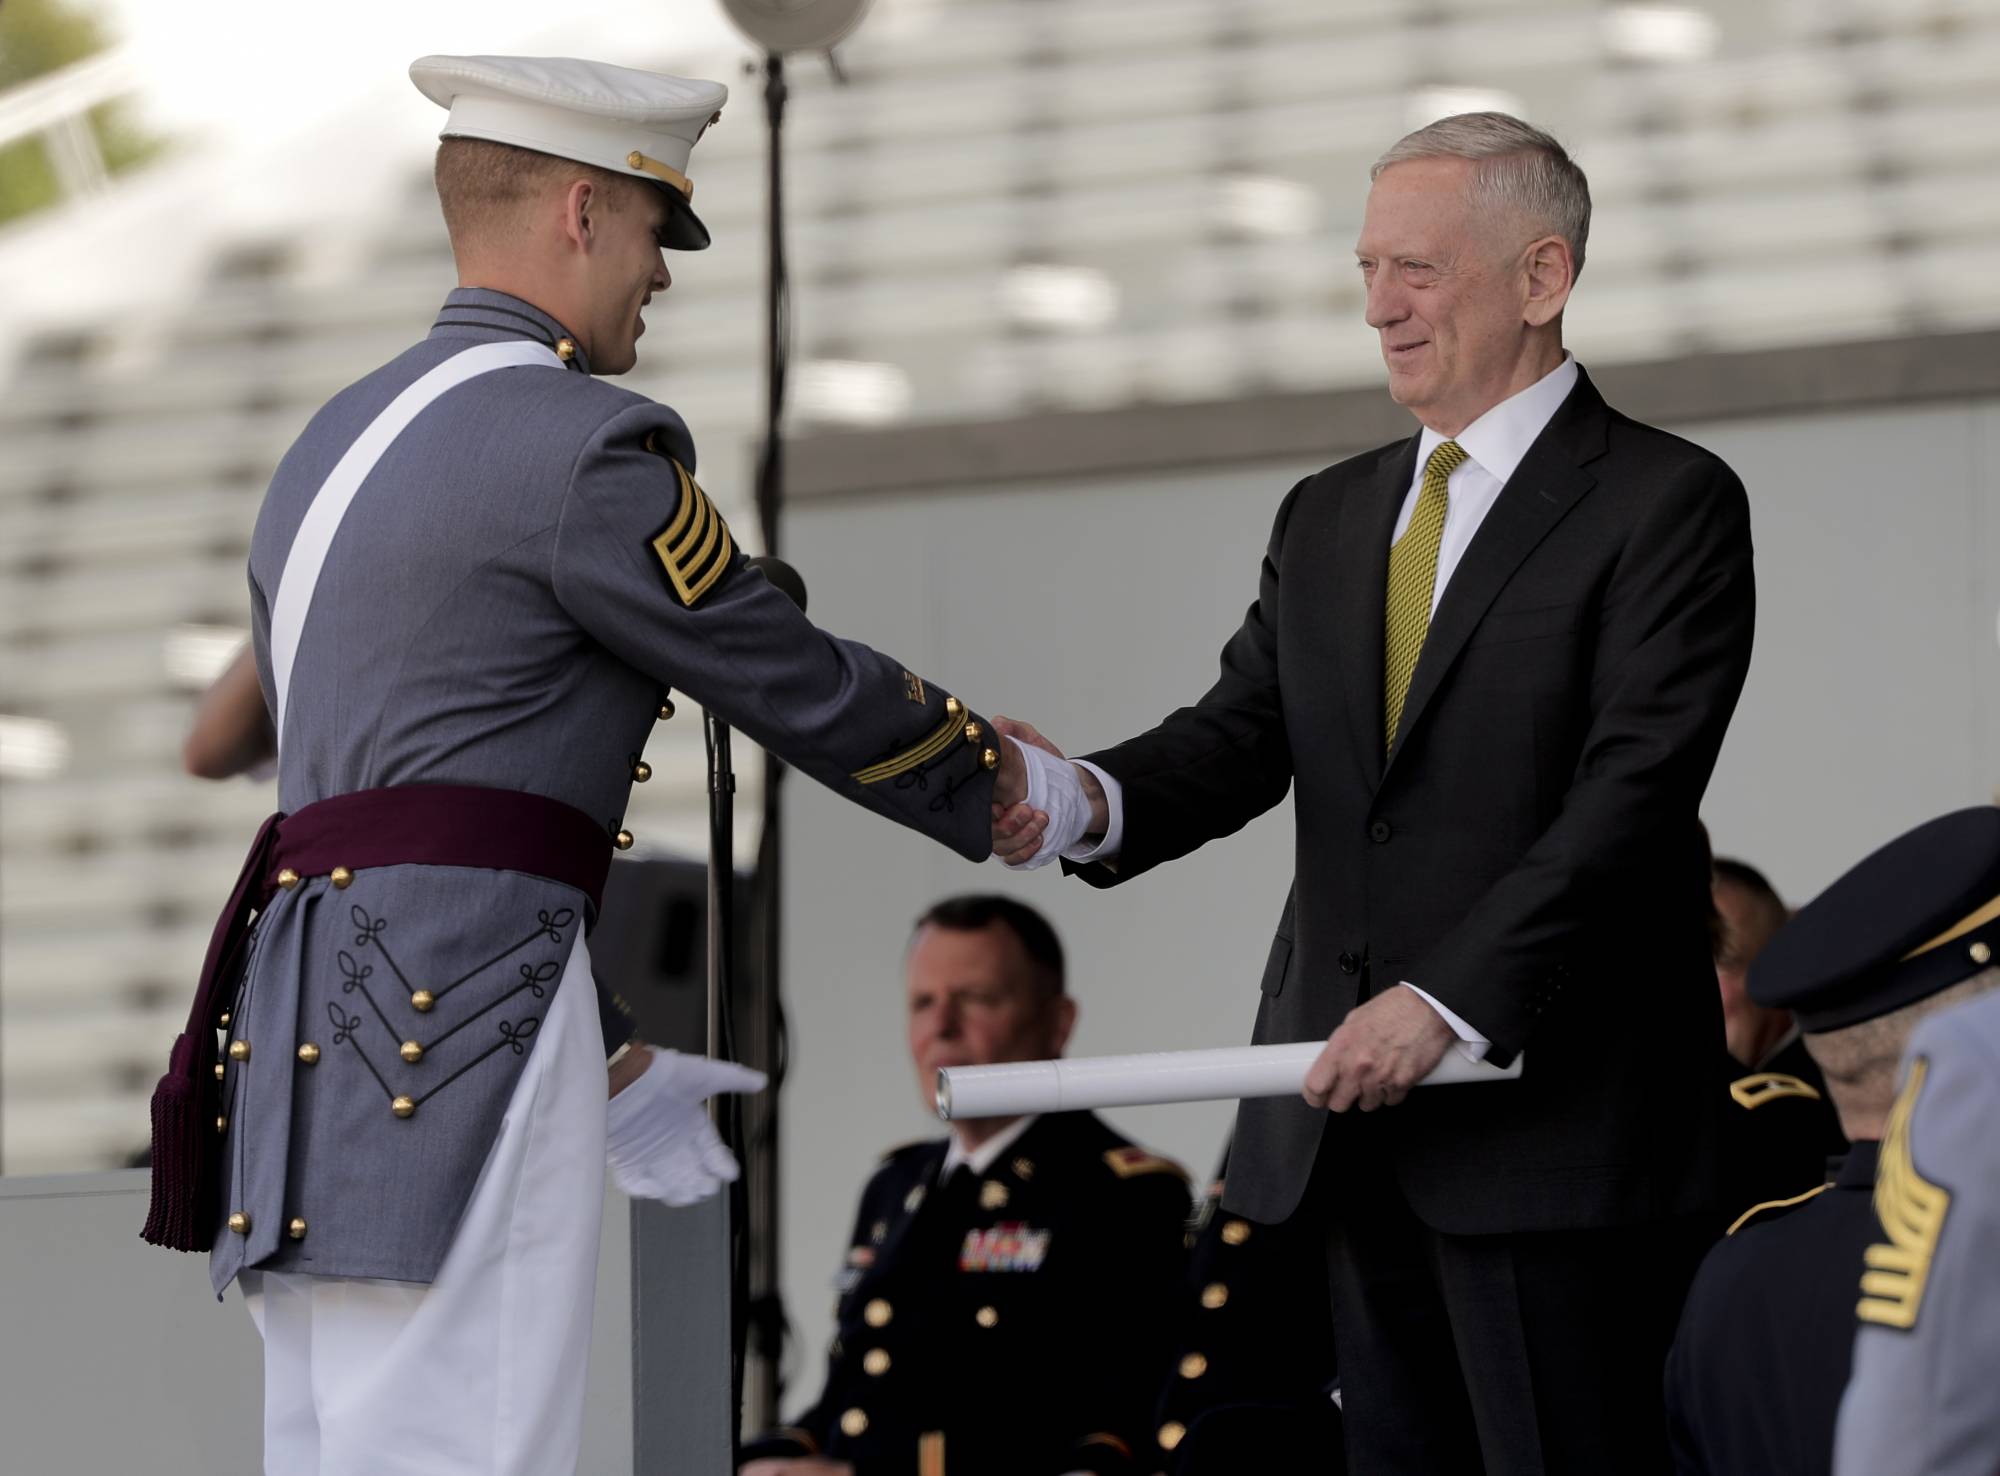 Secretary of Defense James Mattis hands a graduating cadet his diploma while congratulating him during commencement ceremonies at the United States Military Academy, Saturday, May 27, 2017, in West Point, N.Y. Nine Hundred and thirty six cadets received their diplomas, most of whom will be commissioned as second lieutenants in the army. (AP Photo/Julie Jacobson)